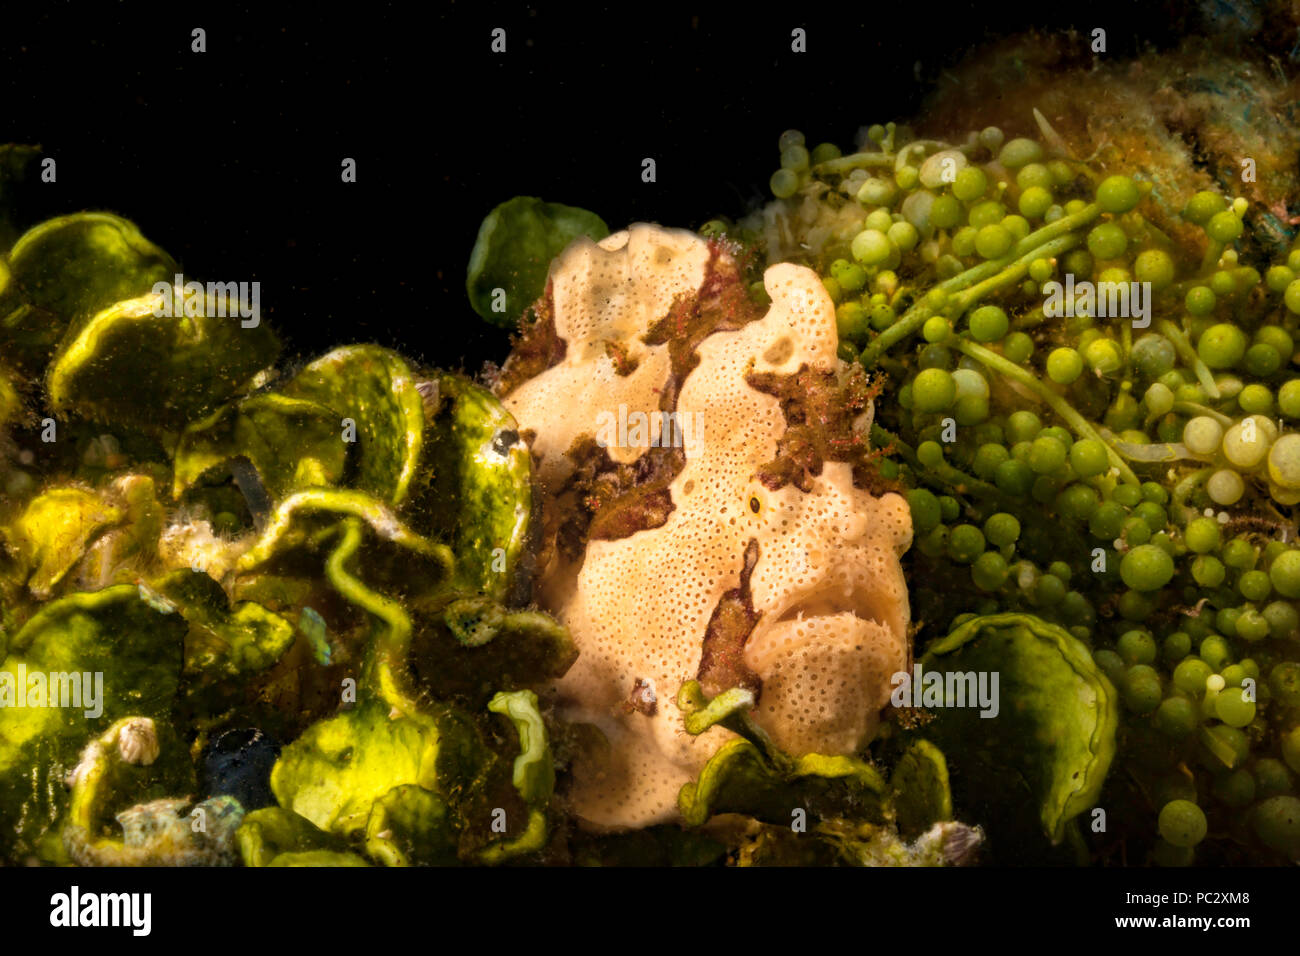 A warty frogfish, Antennarius maculatus, between to types of seaweed off Dumaguete, Philippines. Stock Photo